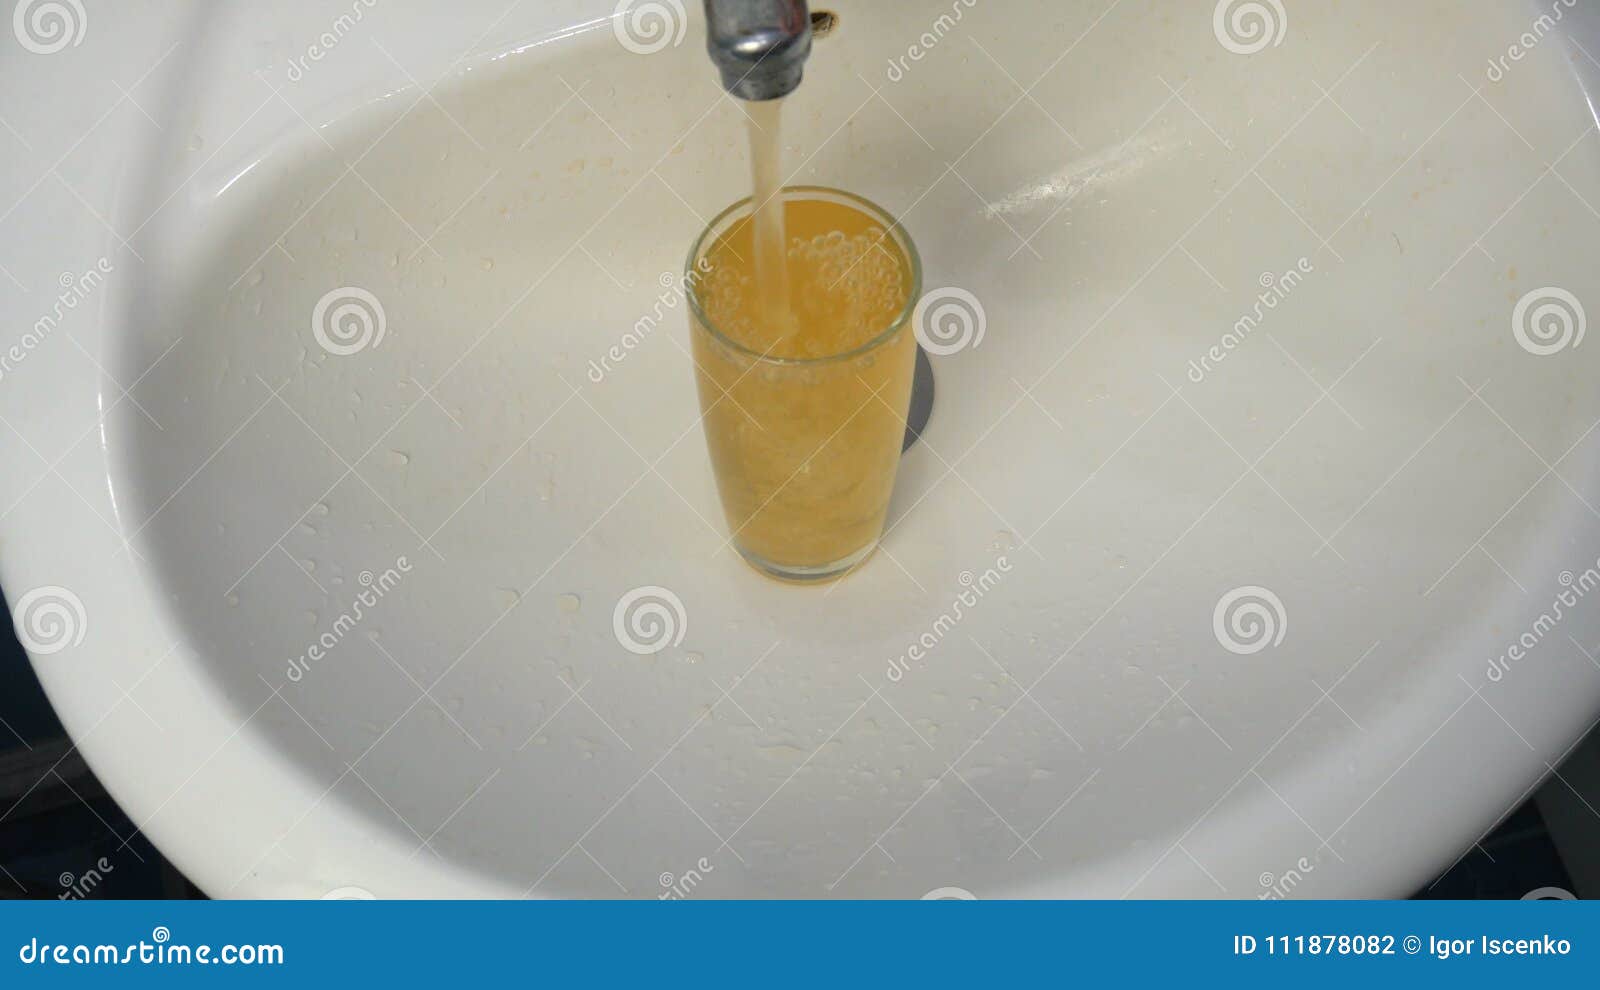 Faucet Water Runs In Sink Starts Out Dirty Rusty Golden Brown